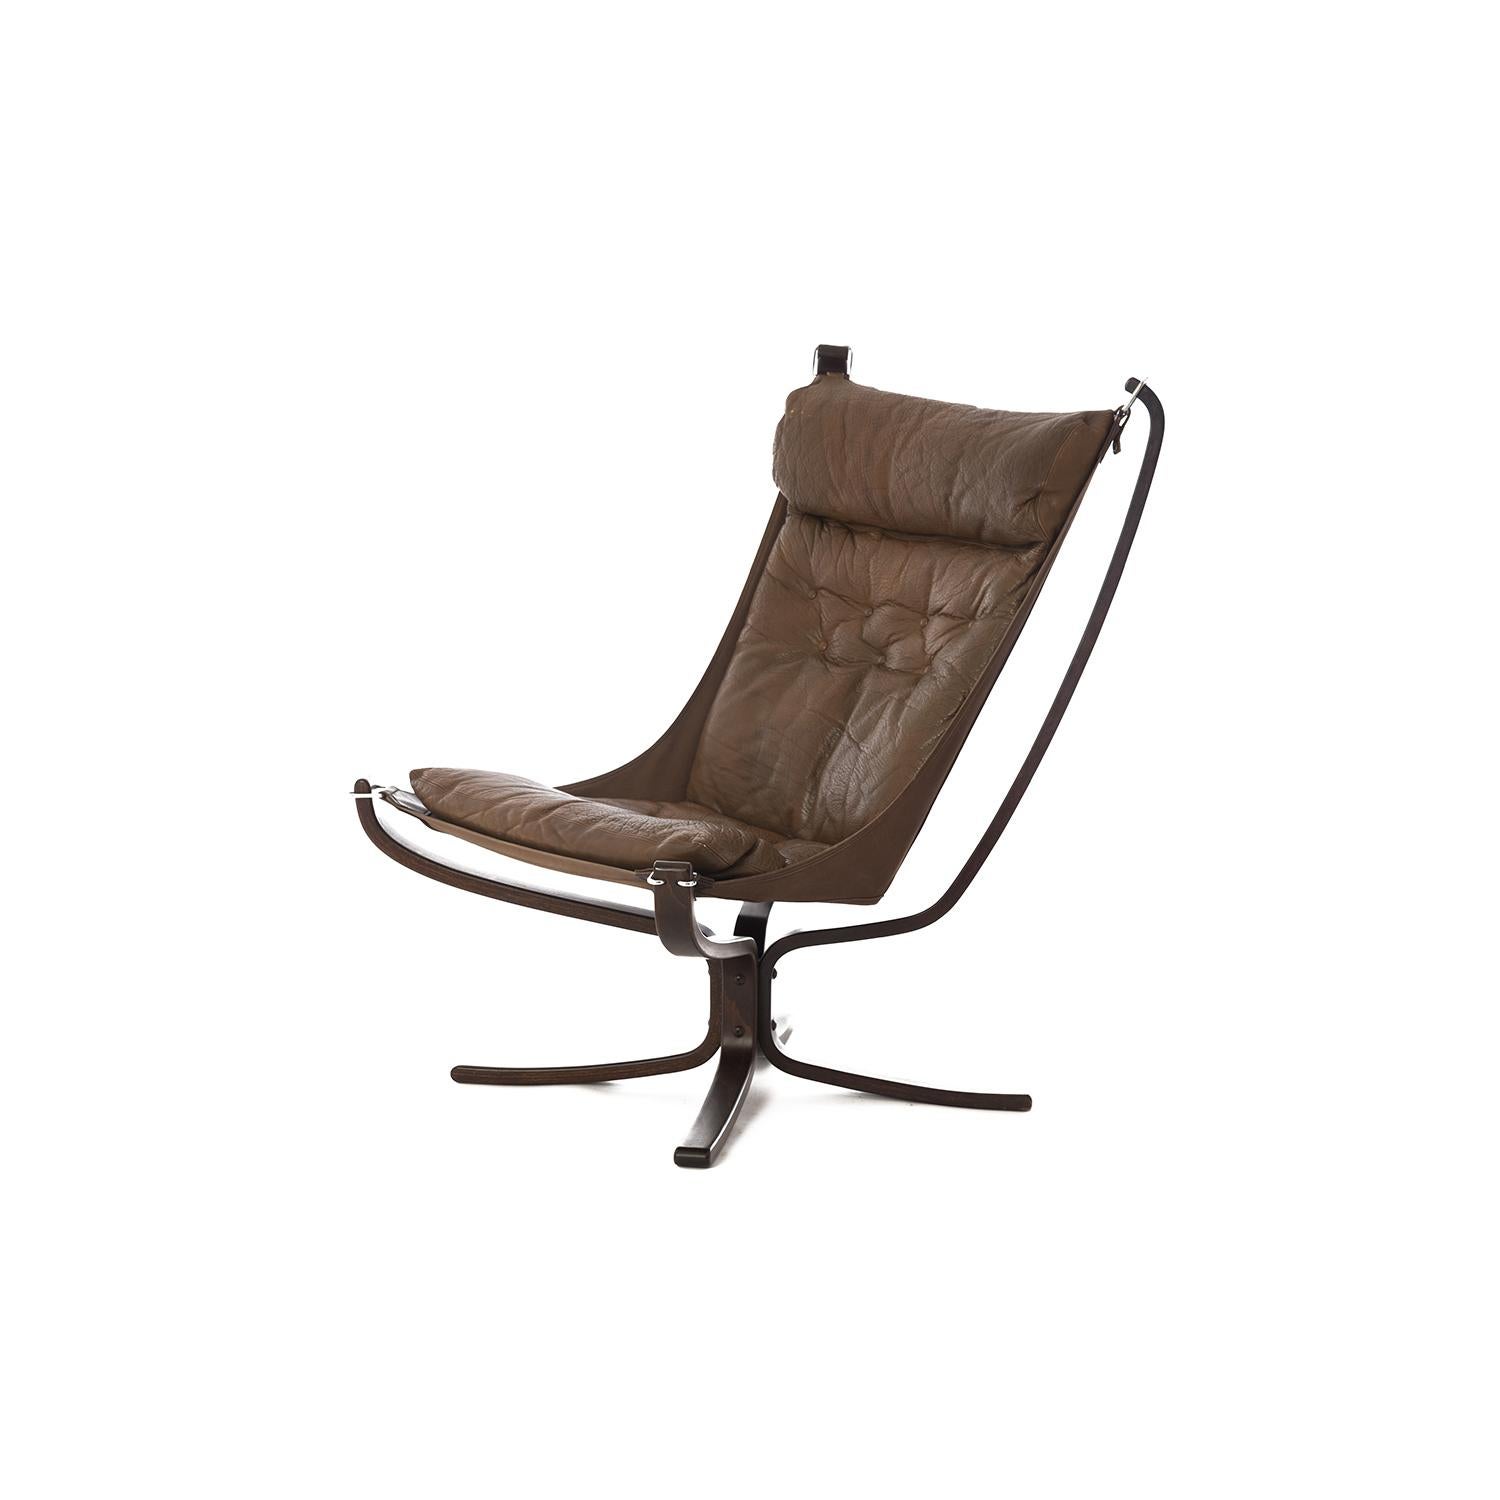 Iconic X-framed falcon lounge chair designed by Sigurd Ressell for Vatne Møbler, Norway circa 1970. Featuring a sculptural bentwood beech wood frame, brown canvas sling and dark olive-brown leather cushion. The hammock style floating seat creates a